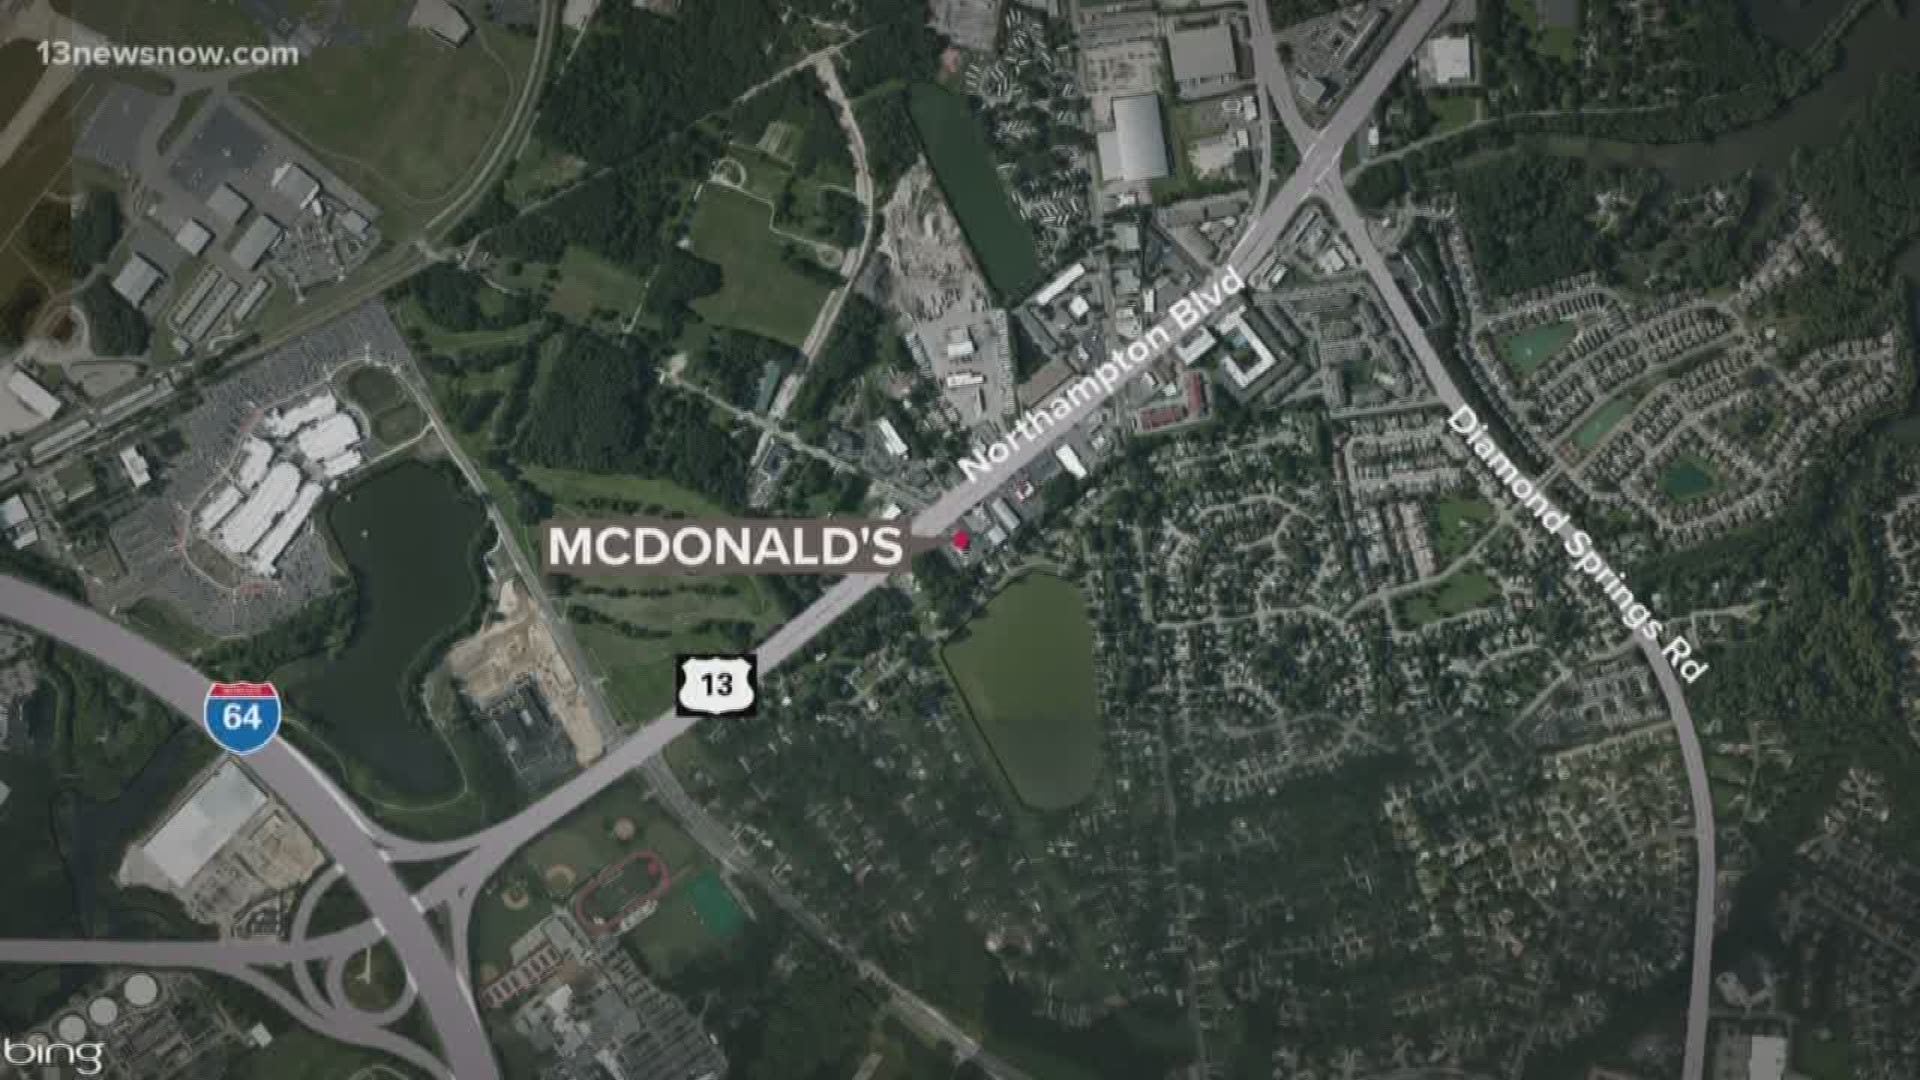 A man shot at a McDonald's on Northampton Blvd. in Virginia Beach after getting into a dispute with fast-food workers. No one was hurt.